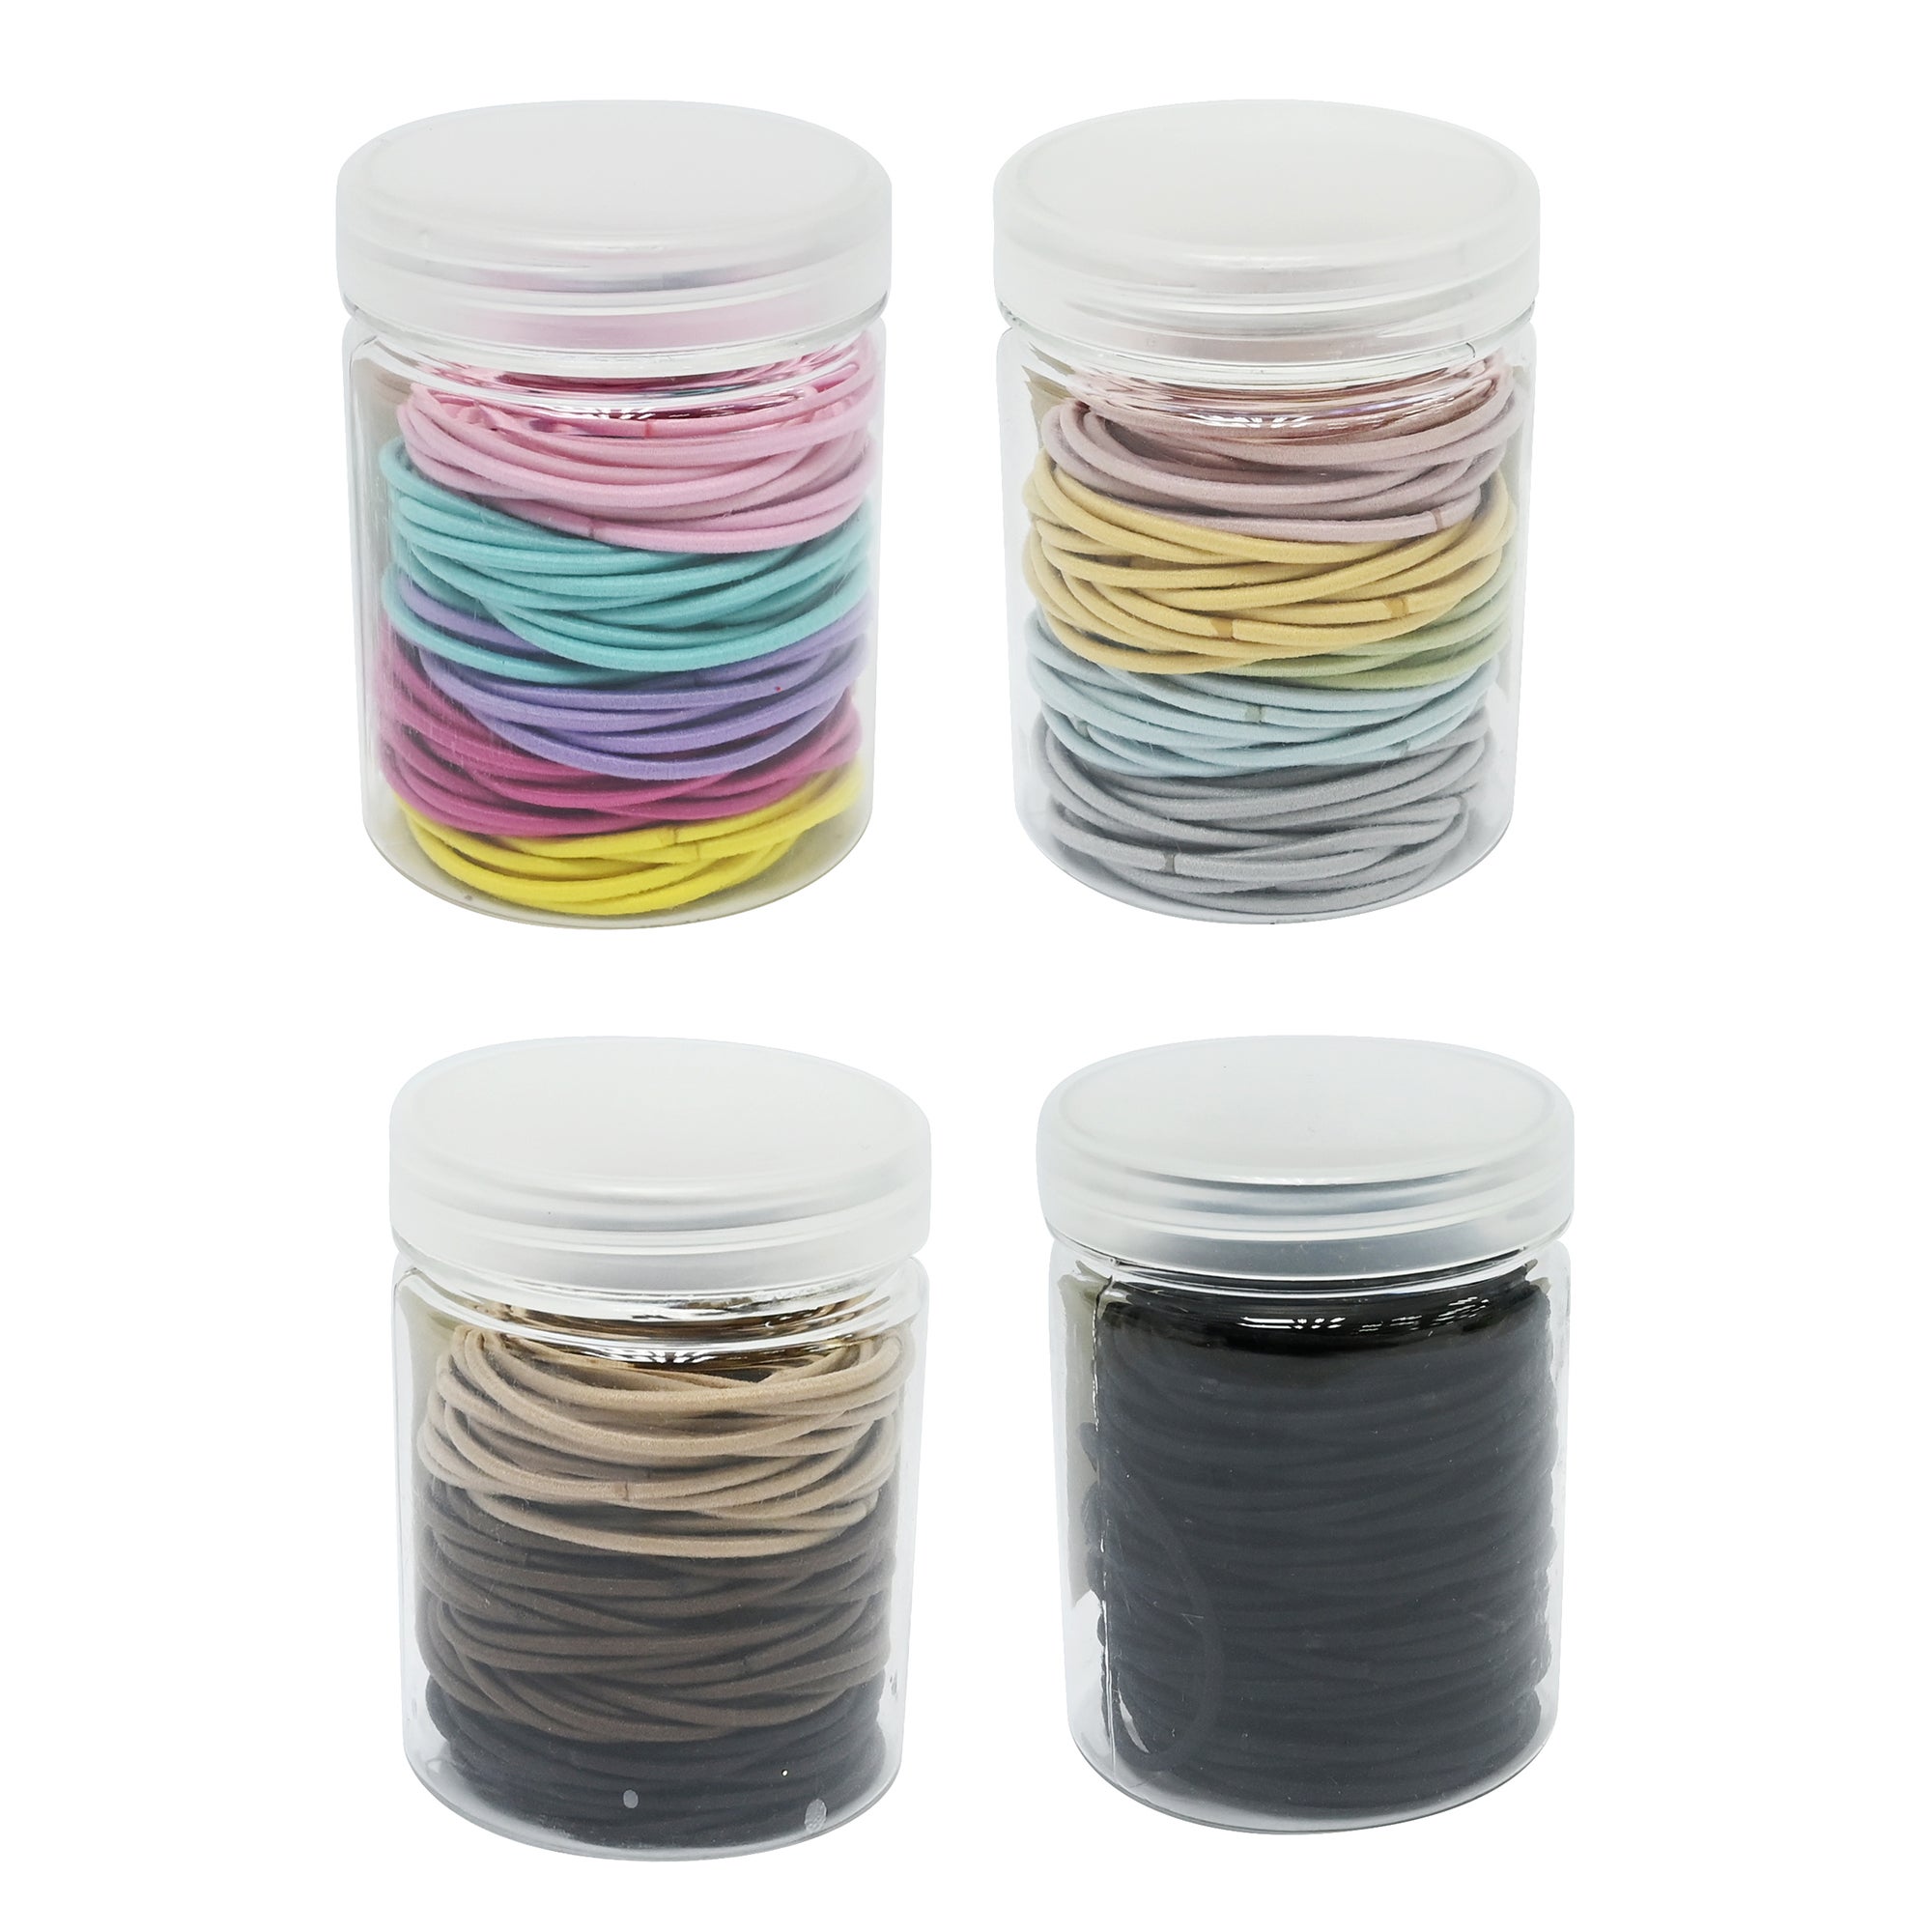 Hair Ties In Container 100pk, Hair Accessories